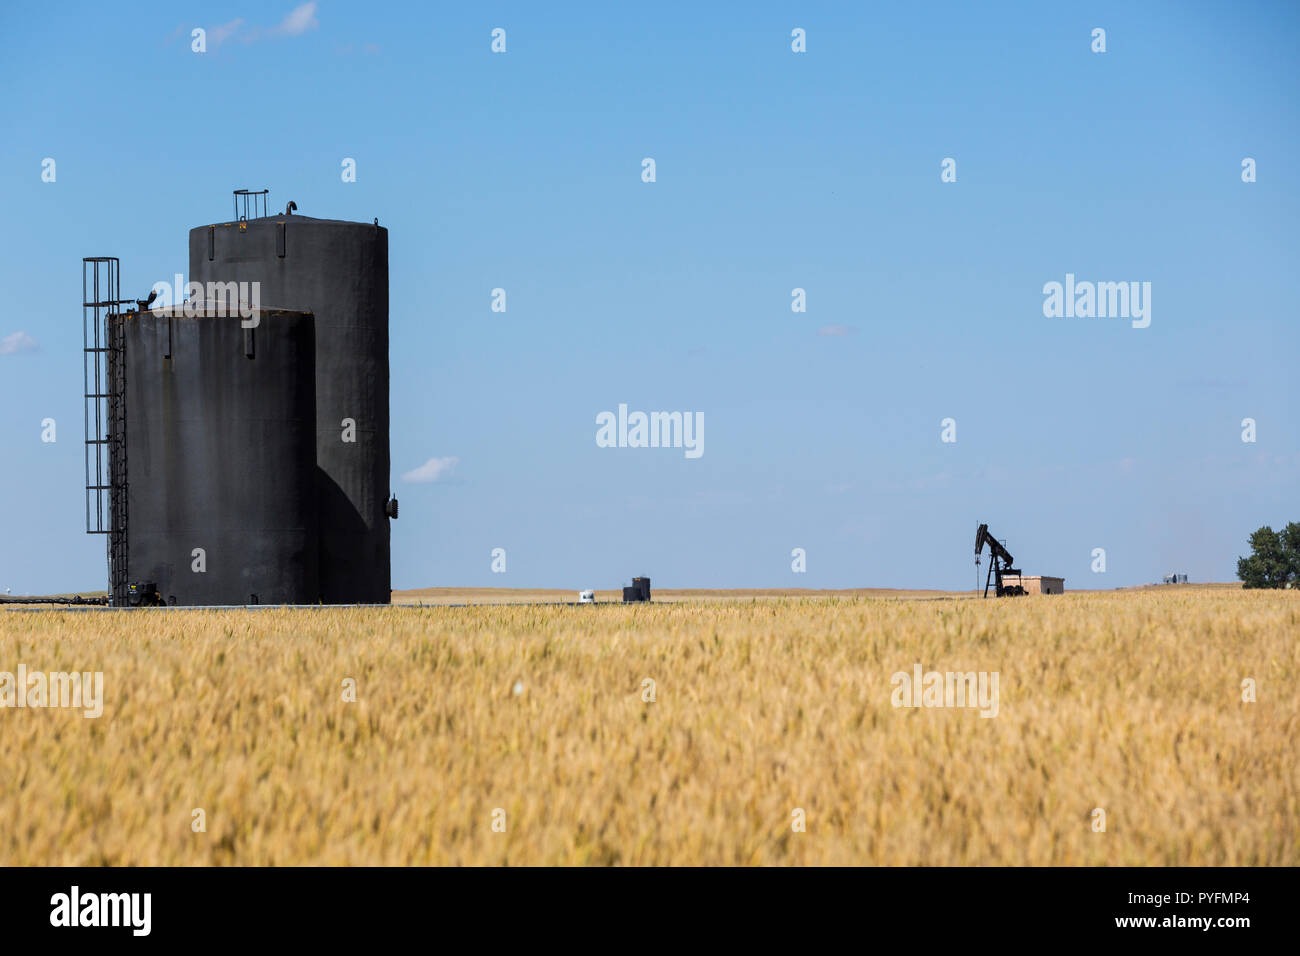 Oil pumpjack and tanks seen through shimmering heat waves surrounded by farmer's field of grain located near Kindersley, Saskachewan Canada. Stock Photo